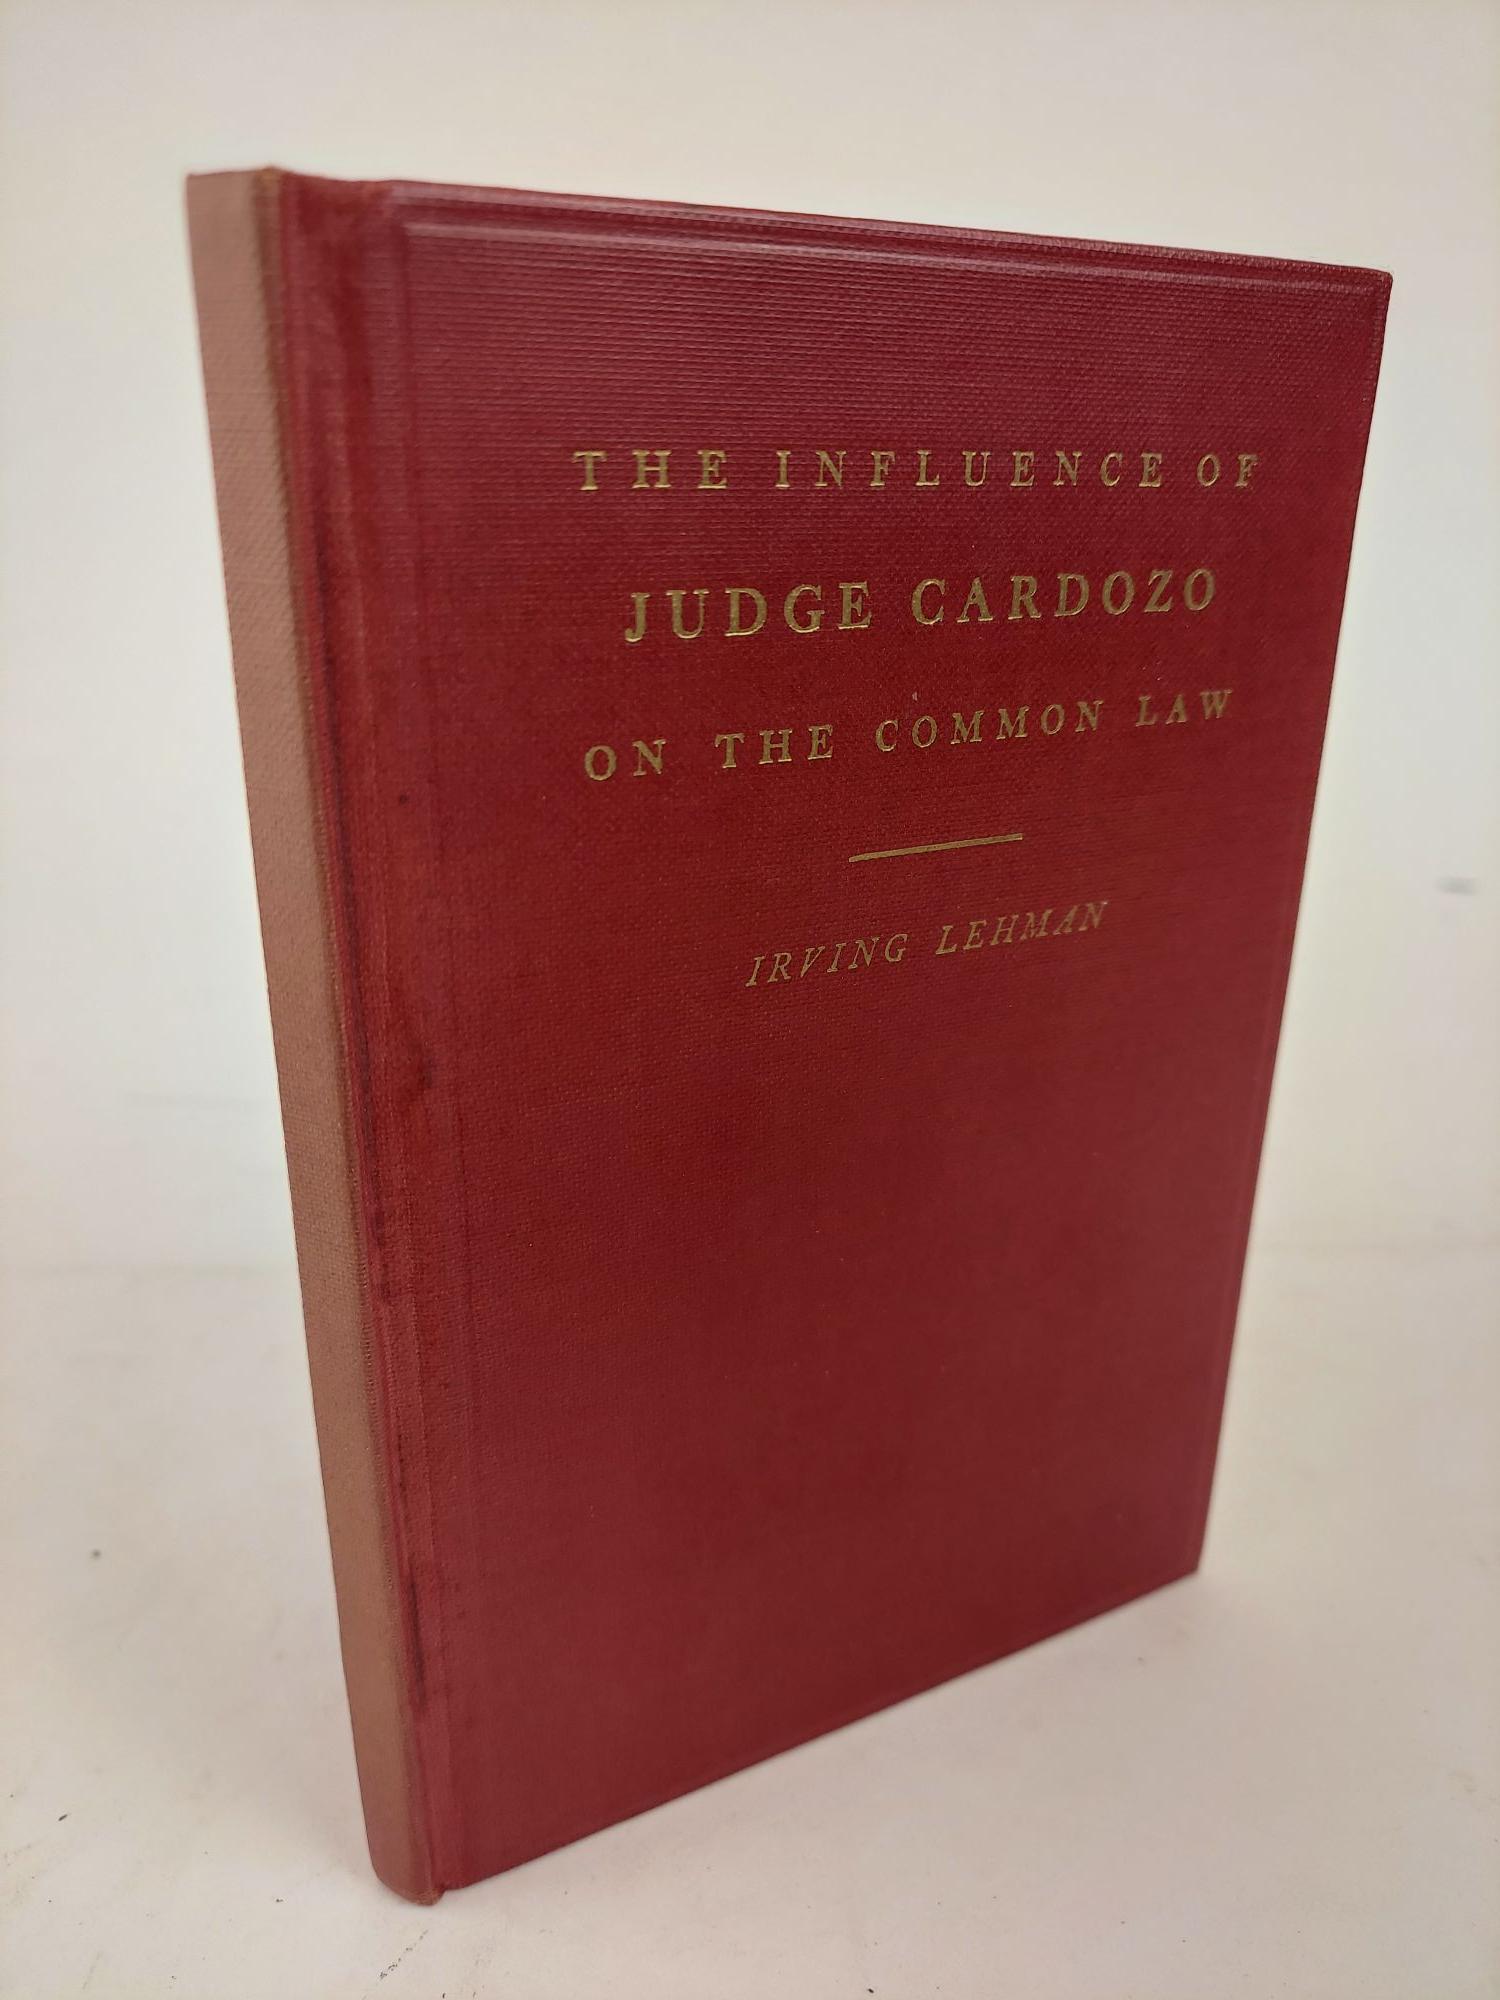 1358915 THE INFLUENCE OF JUDGE CARDOZO ON THE COMMON LAW. Irving Lehman.